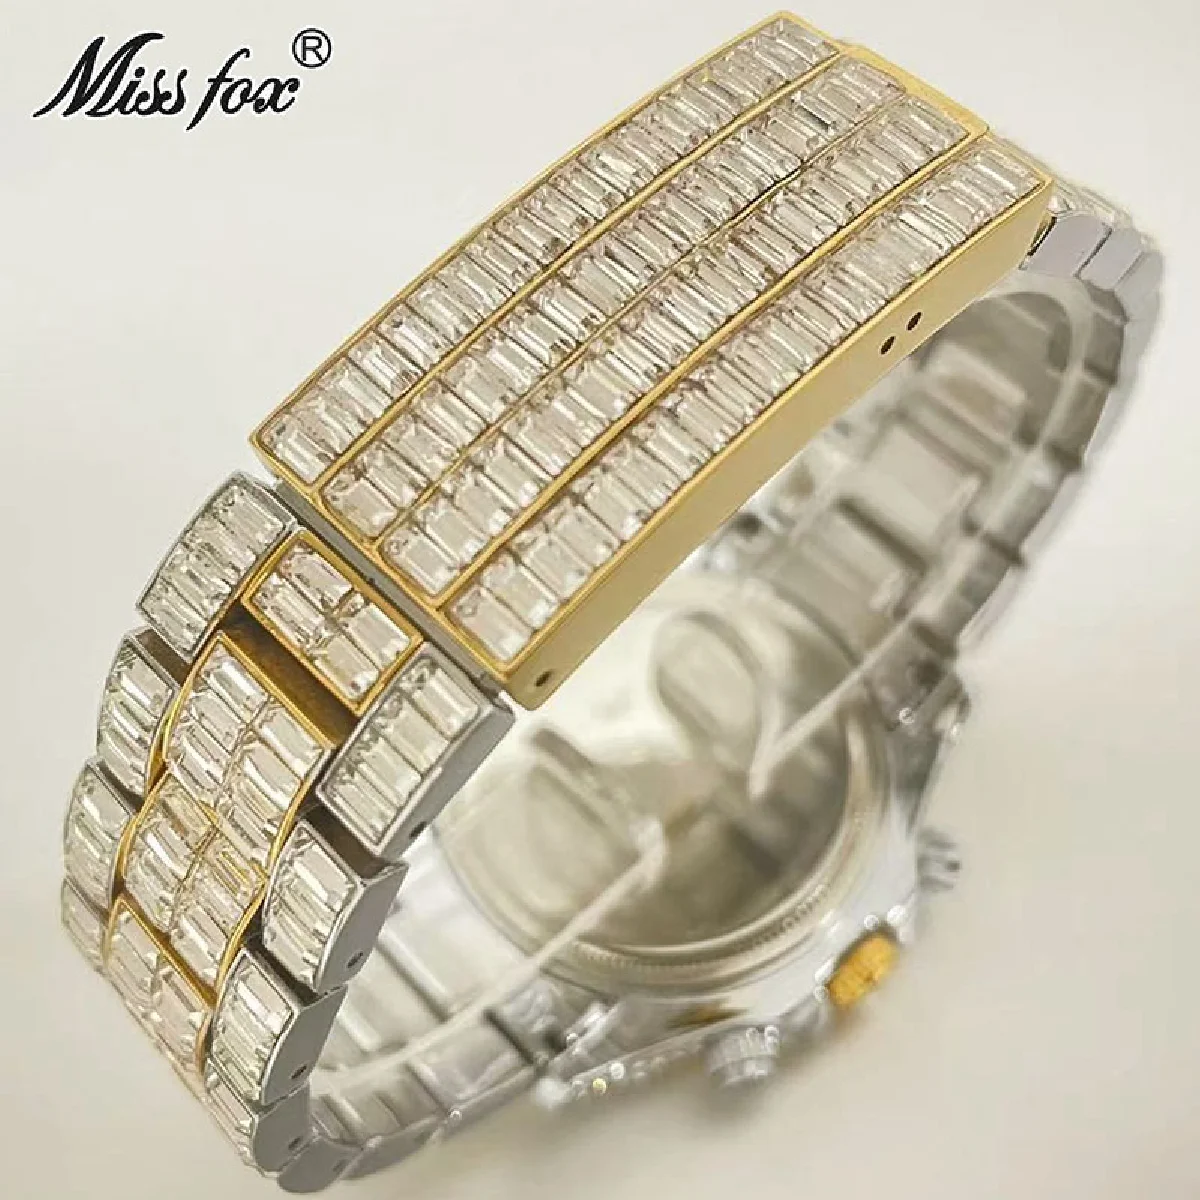 New Hip Hop Brand  Luxury Gold Watch For Men Fashion Iced Out Waterproof Wrist Watches Moissanite Clocks Male Gift Reloj Hombre enlarge